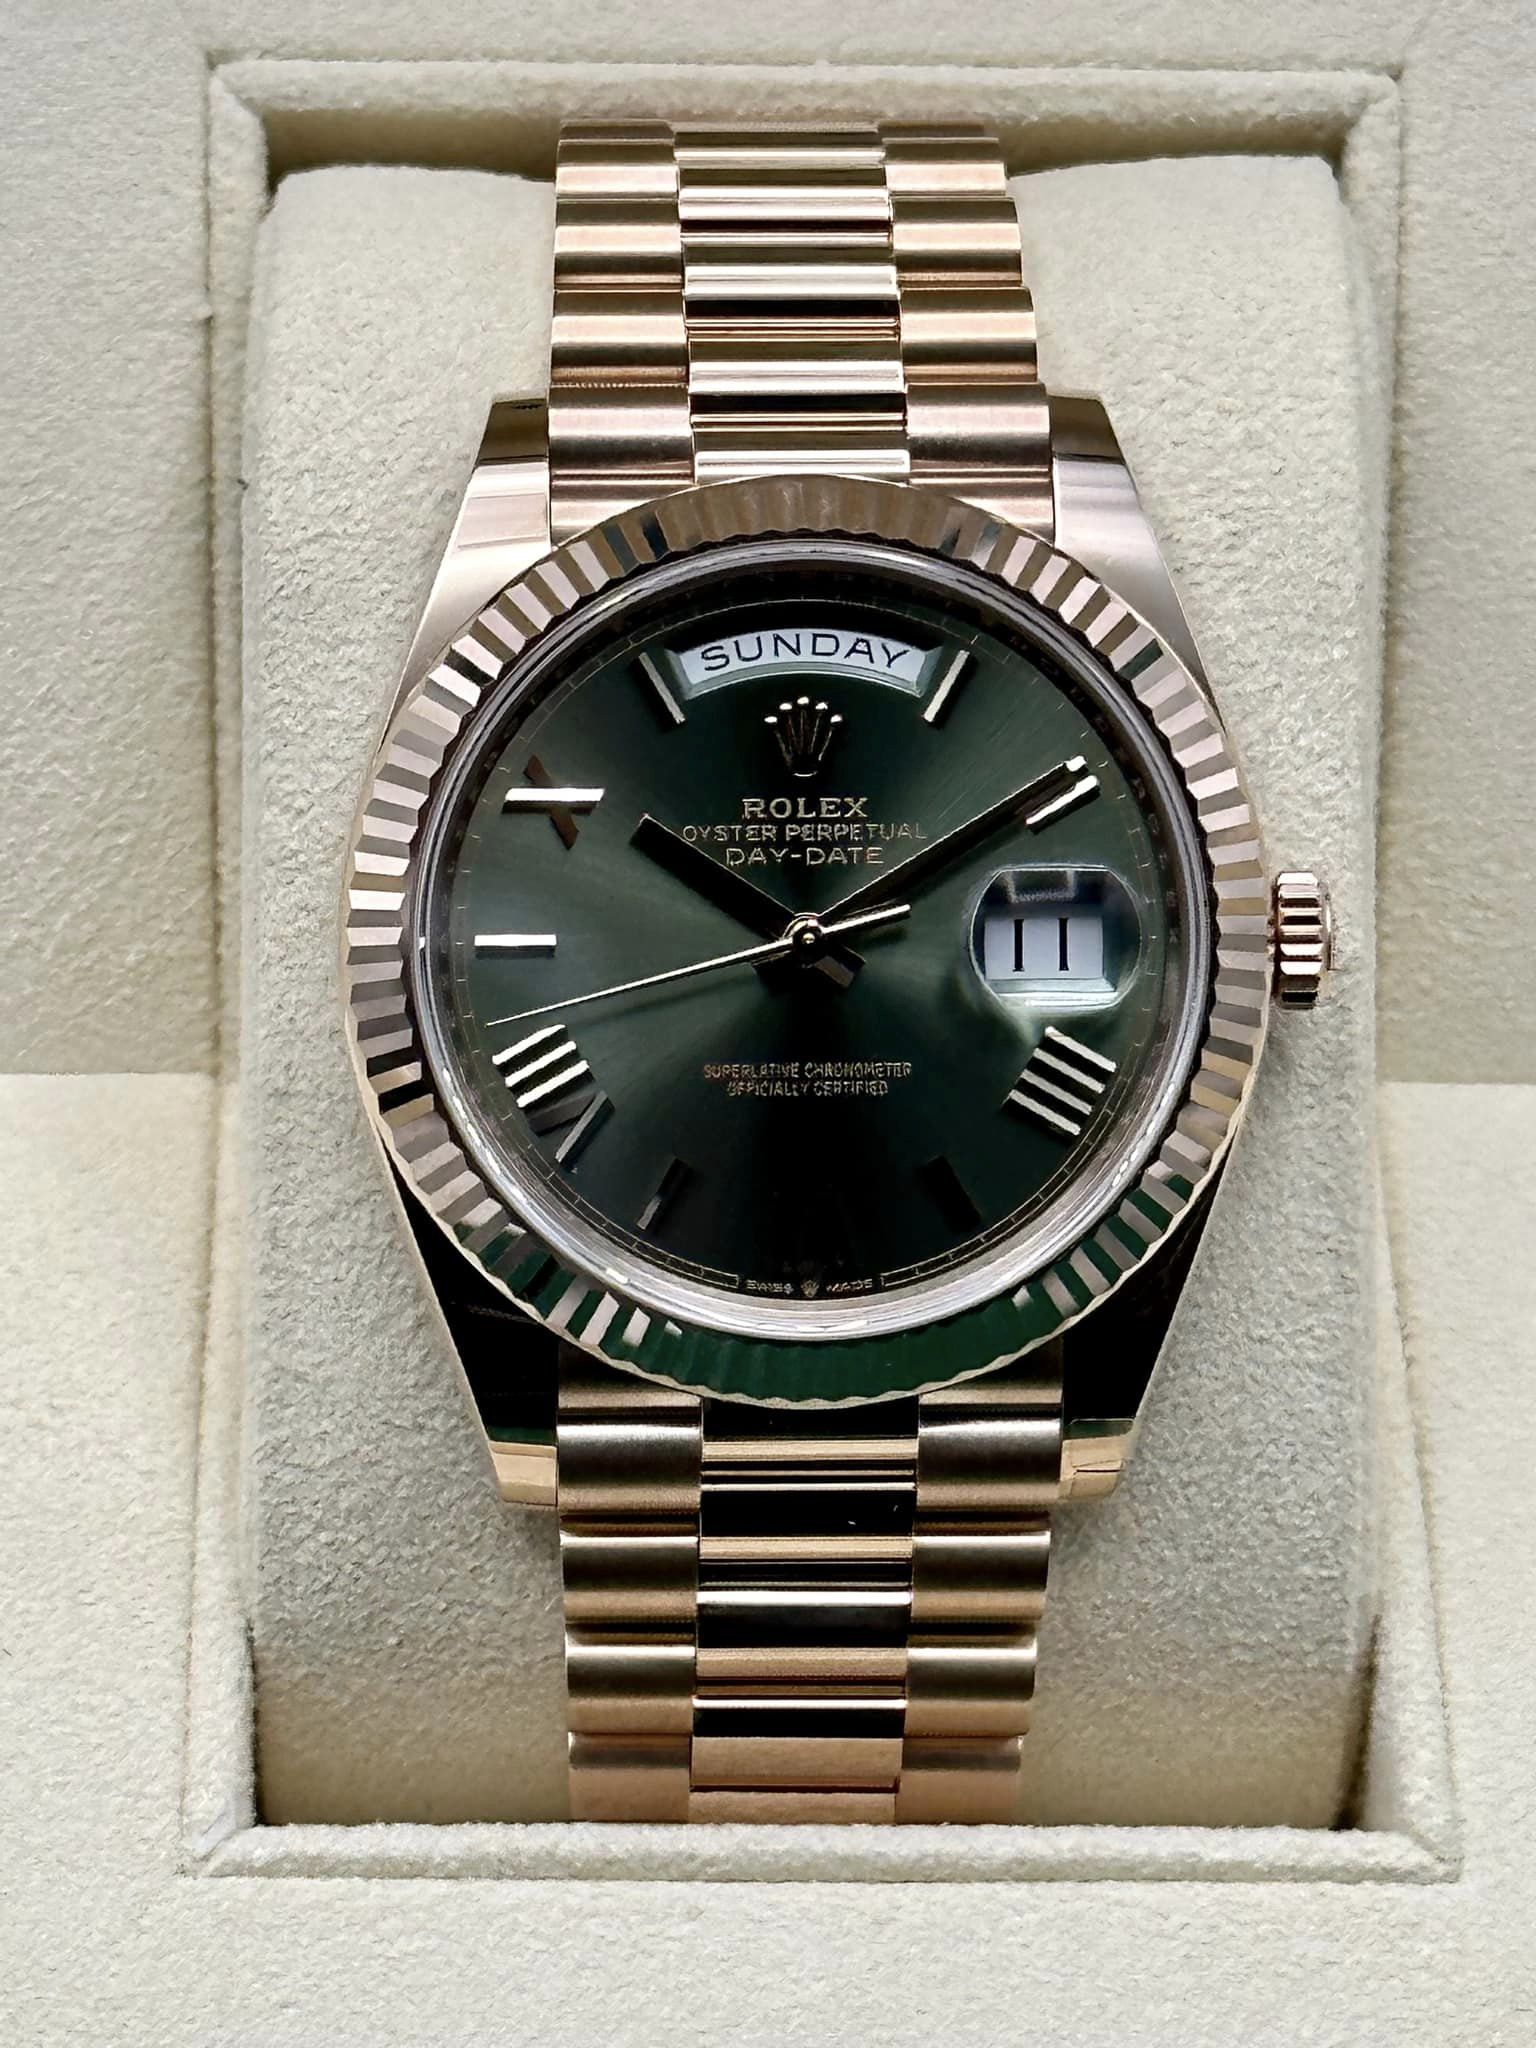 NEW 2020 Rolex Day-Date 40mm 228235 Rose Gold Green Roman Numerals - MyWatchLLC